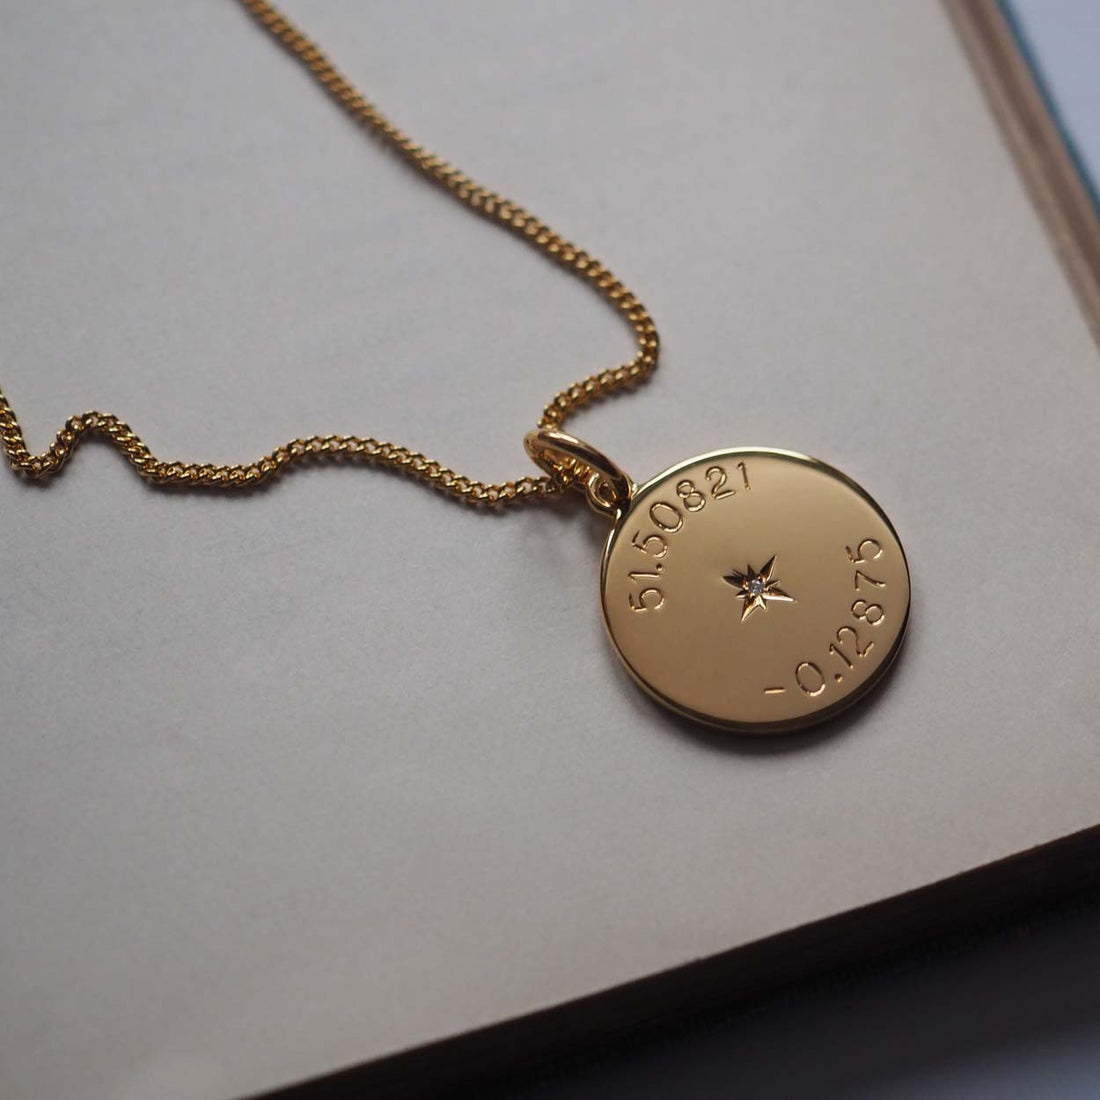 Handmade Diamond Latitude and Longitude Necklace in gold vermeil, featuring personalized coordinates, evoking celestial navigation and cherished memories